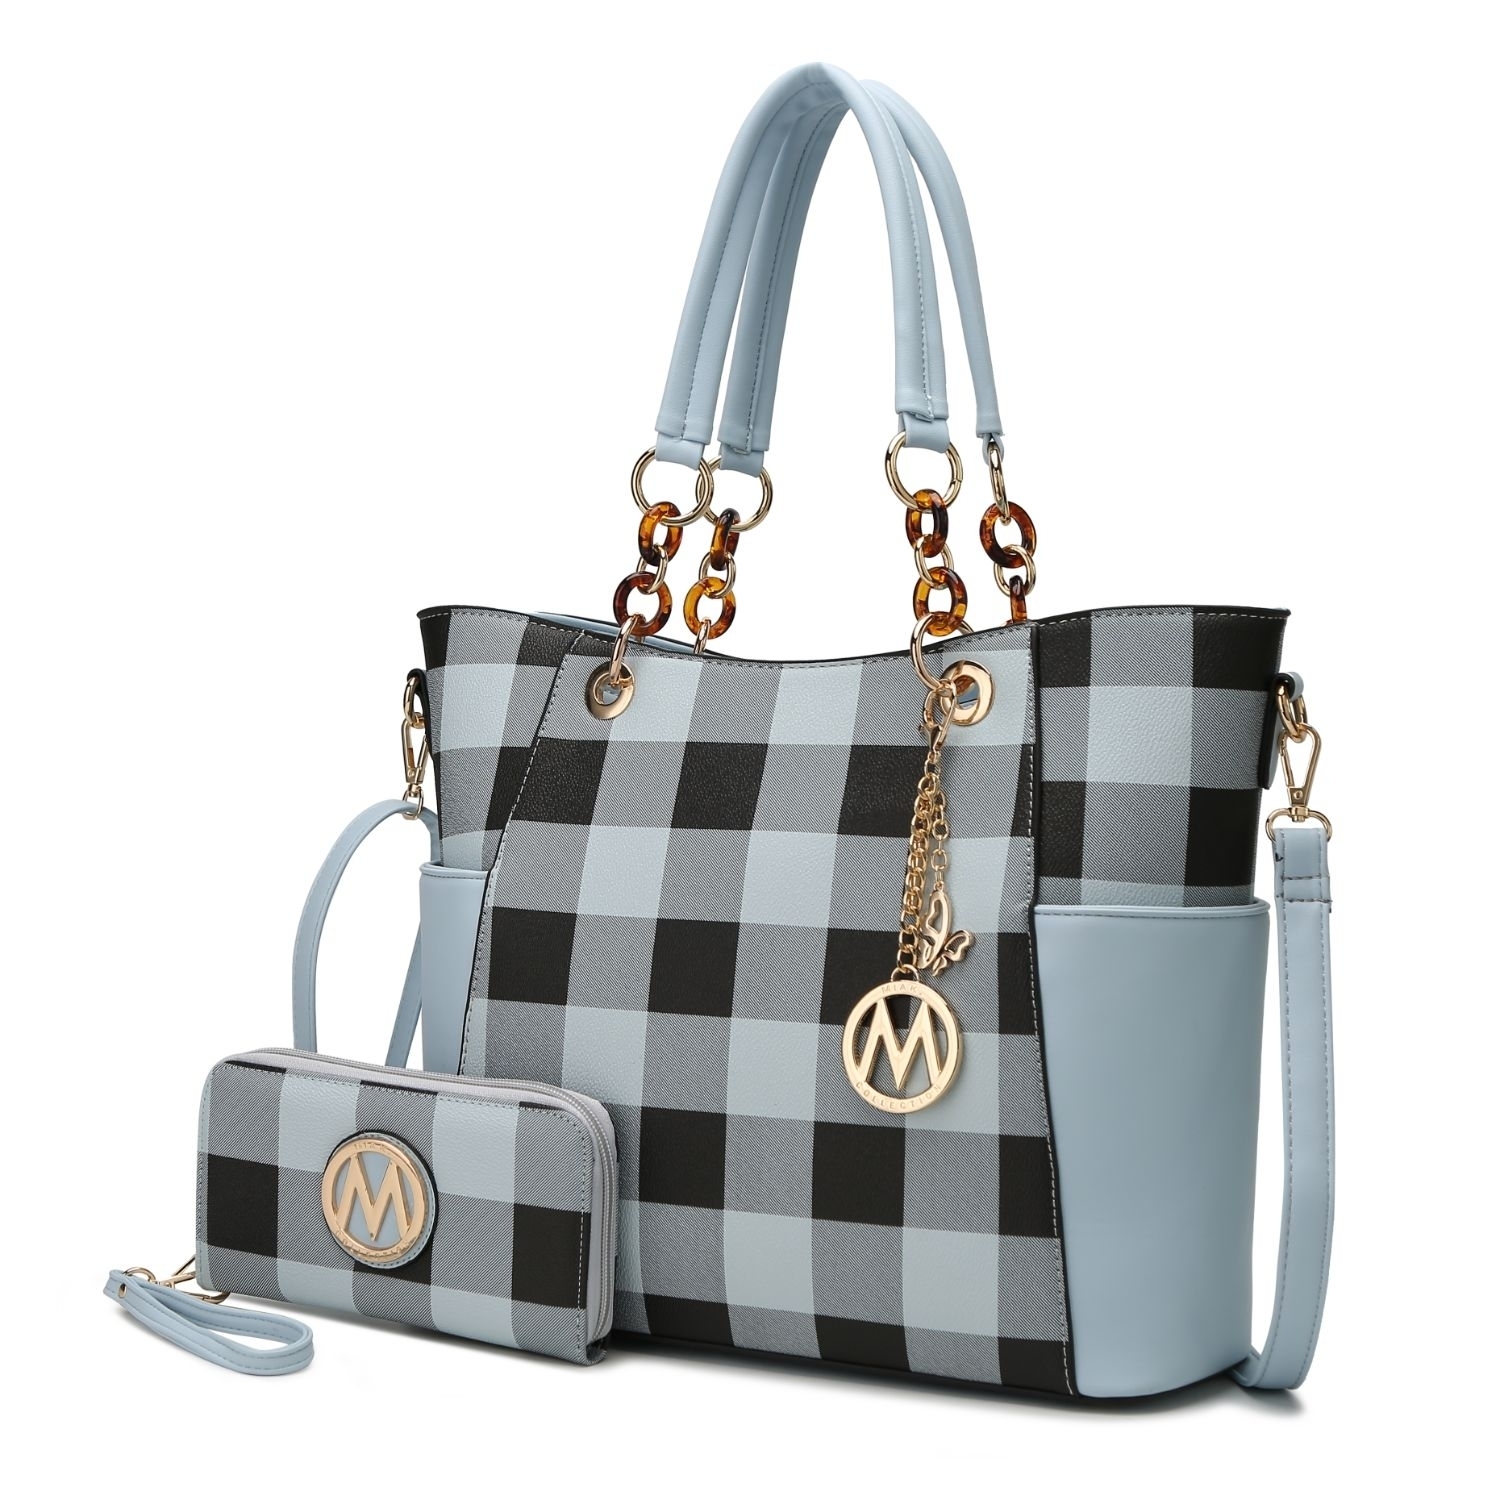 Bonita Checkered Tote 2 Pcs Wome's Large Handbag With Wallet And Decorative M Keychain By Mia K. - Light Blue